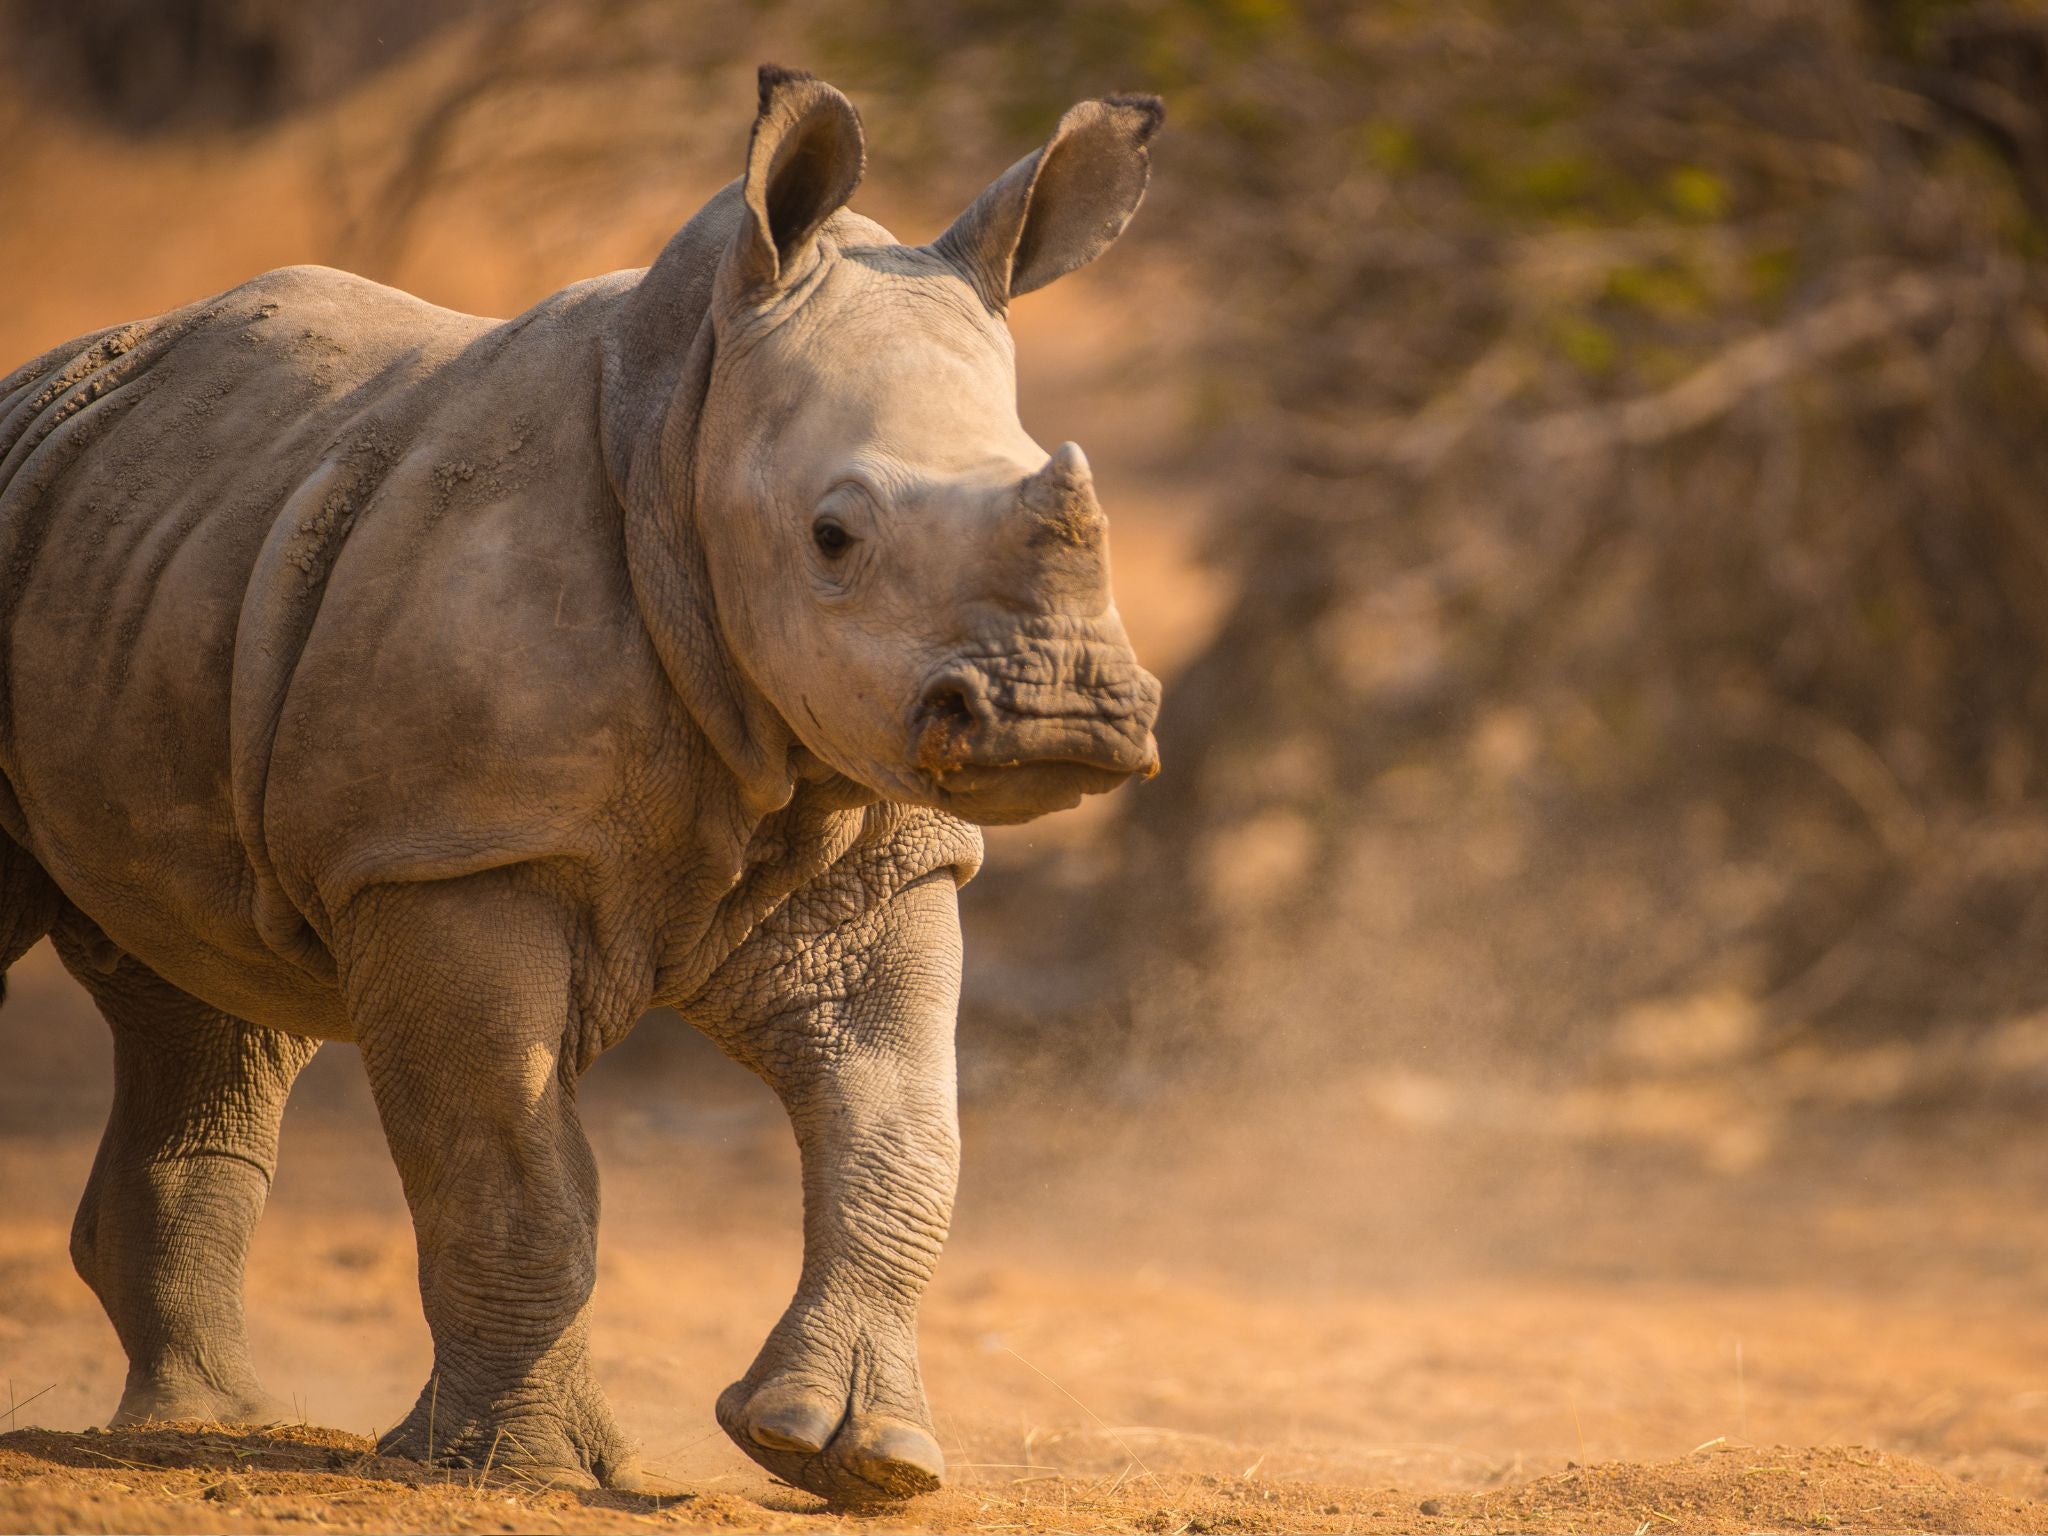 Baby rhino in South Africa by Shannon Wild